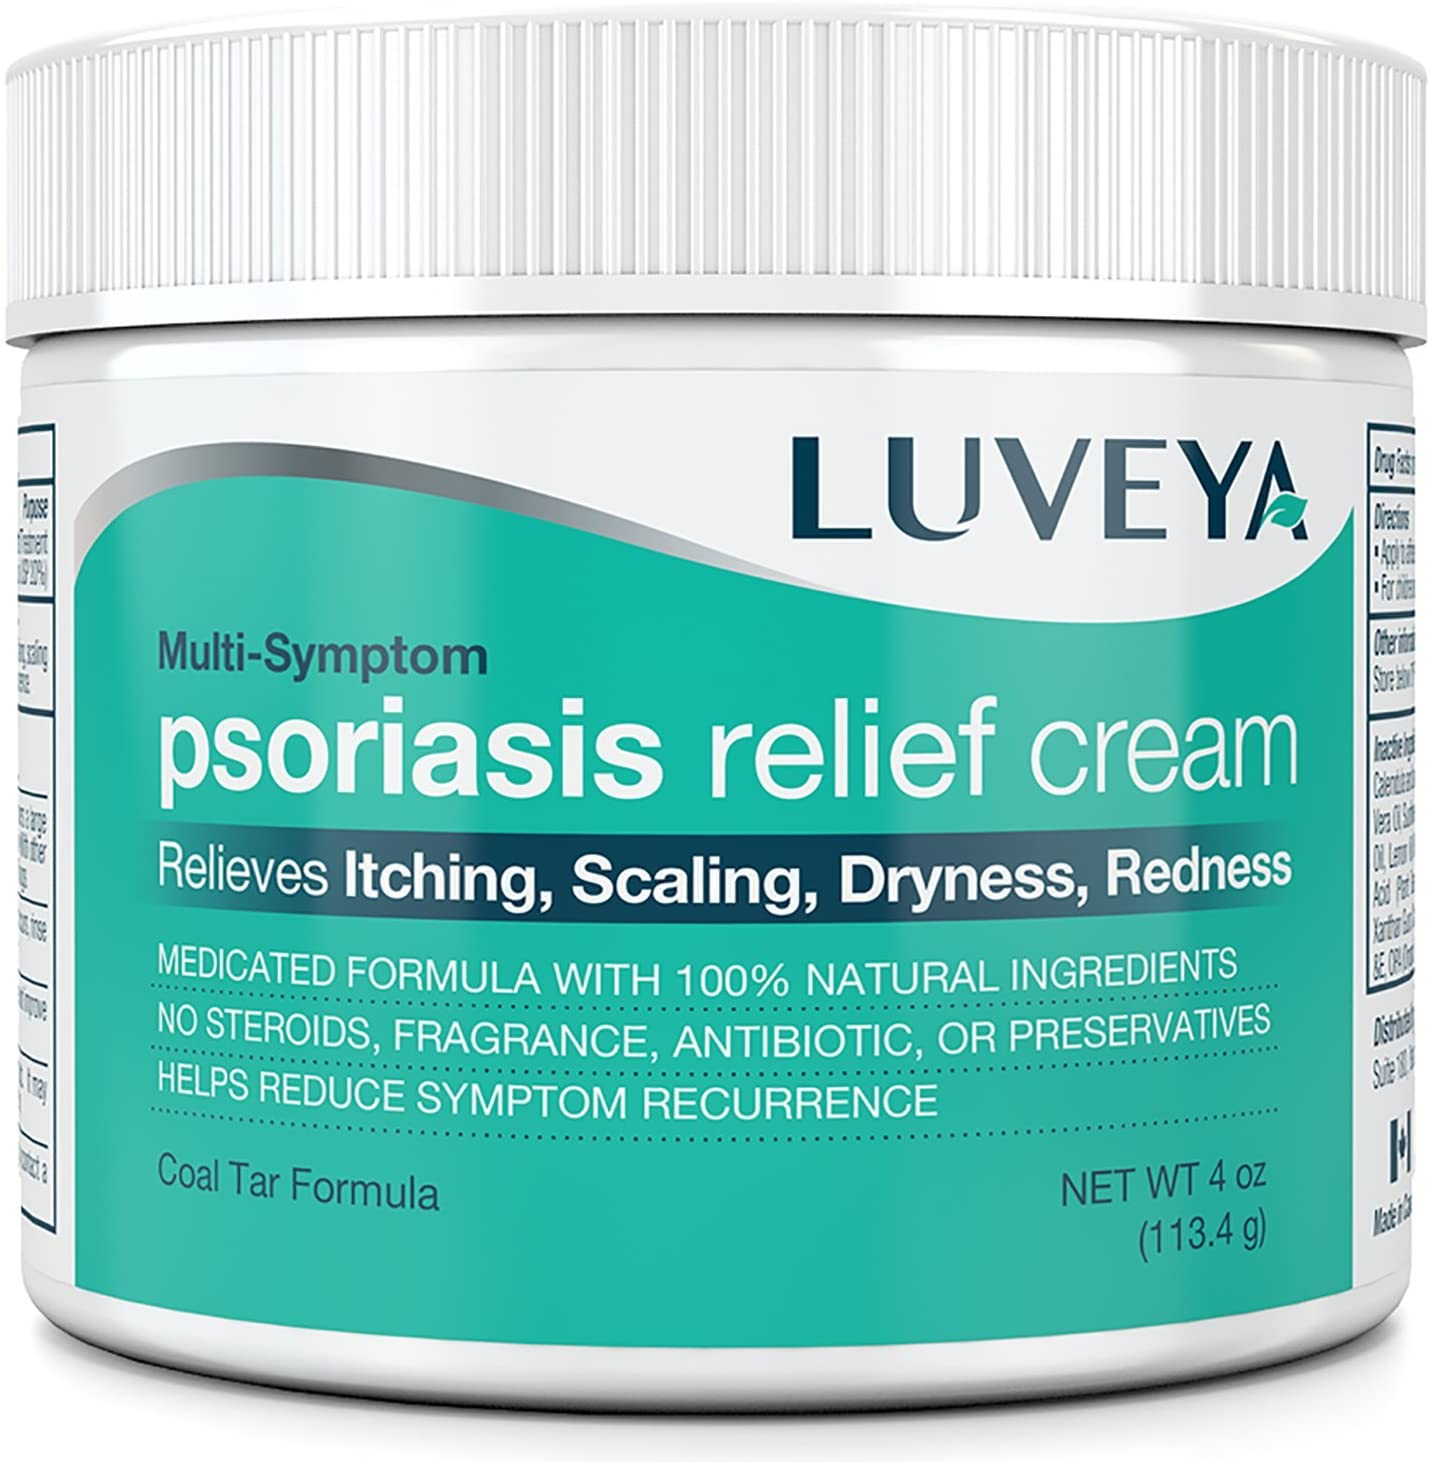 Advanced Psoriasis Treatment Cream Moisturizer. Instant Relief for Dry ...